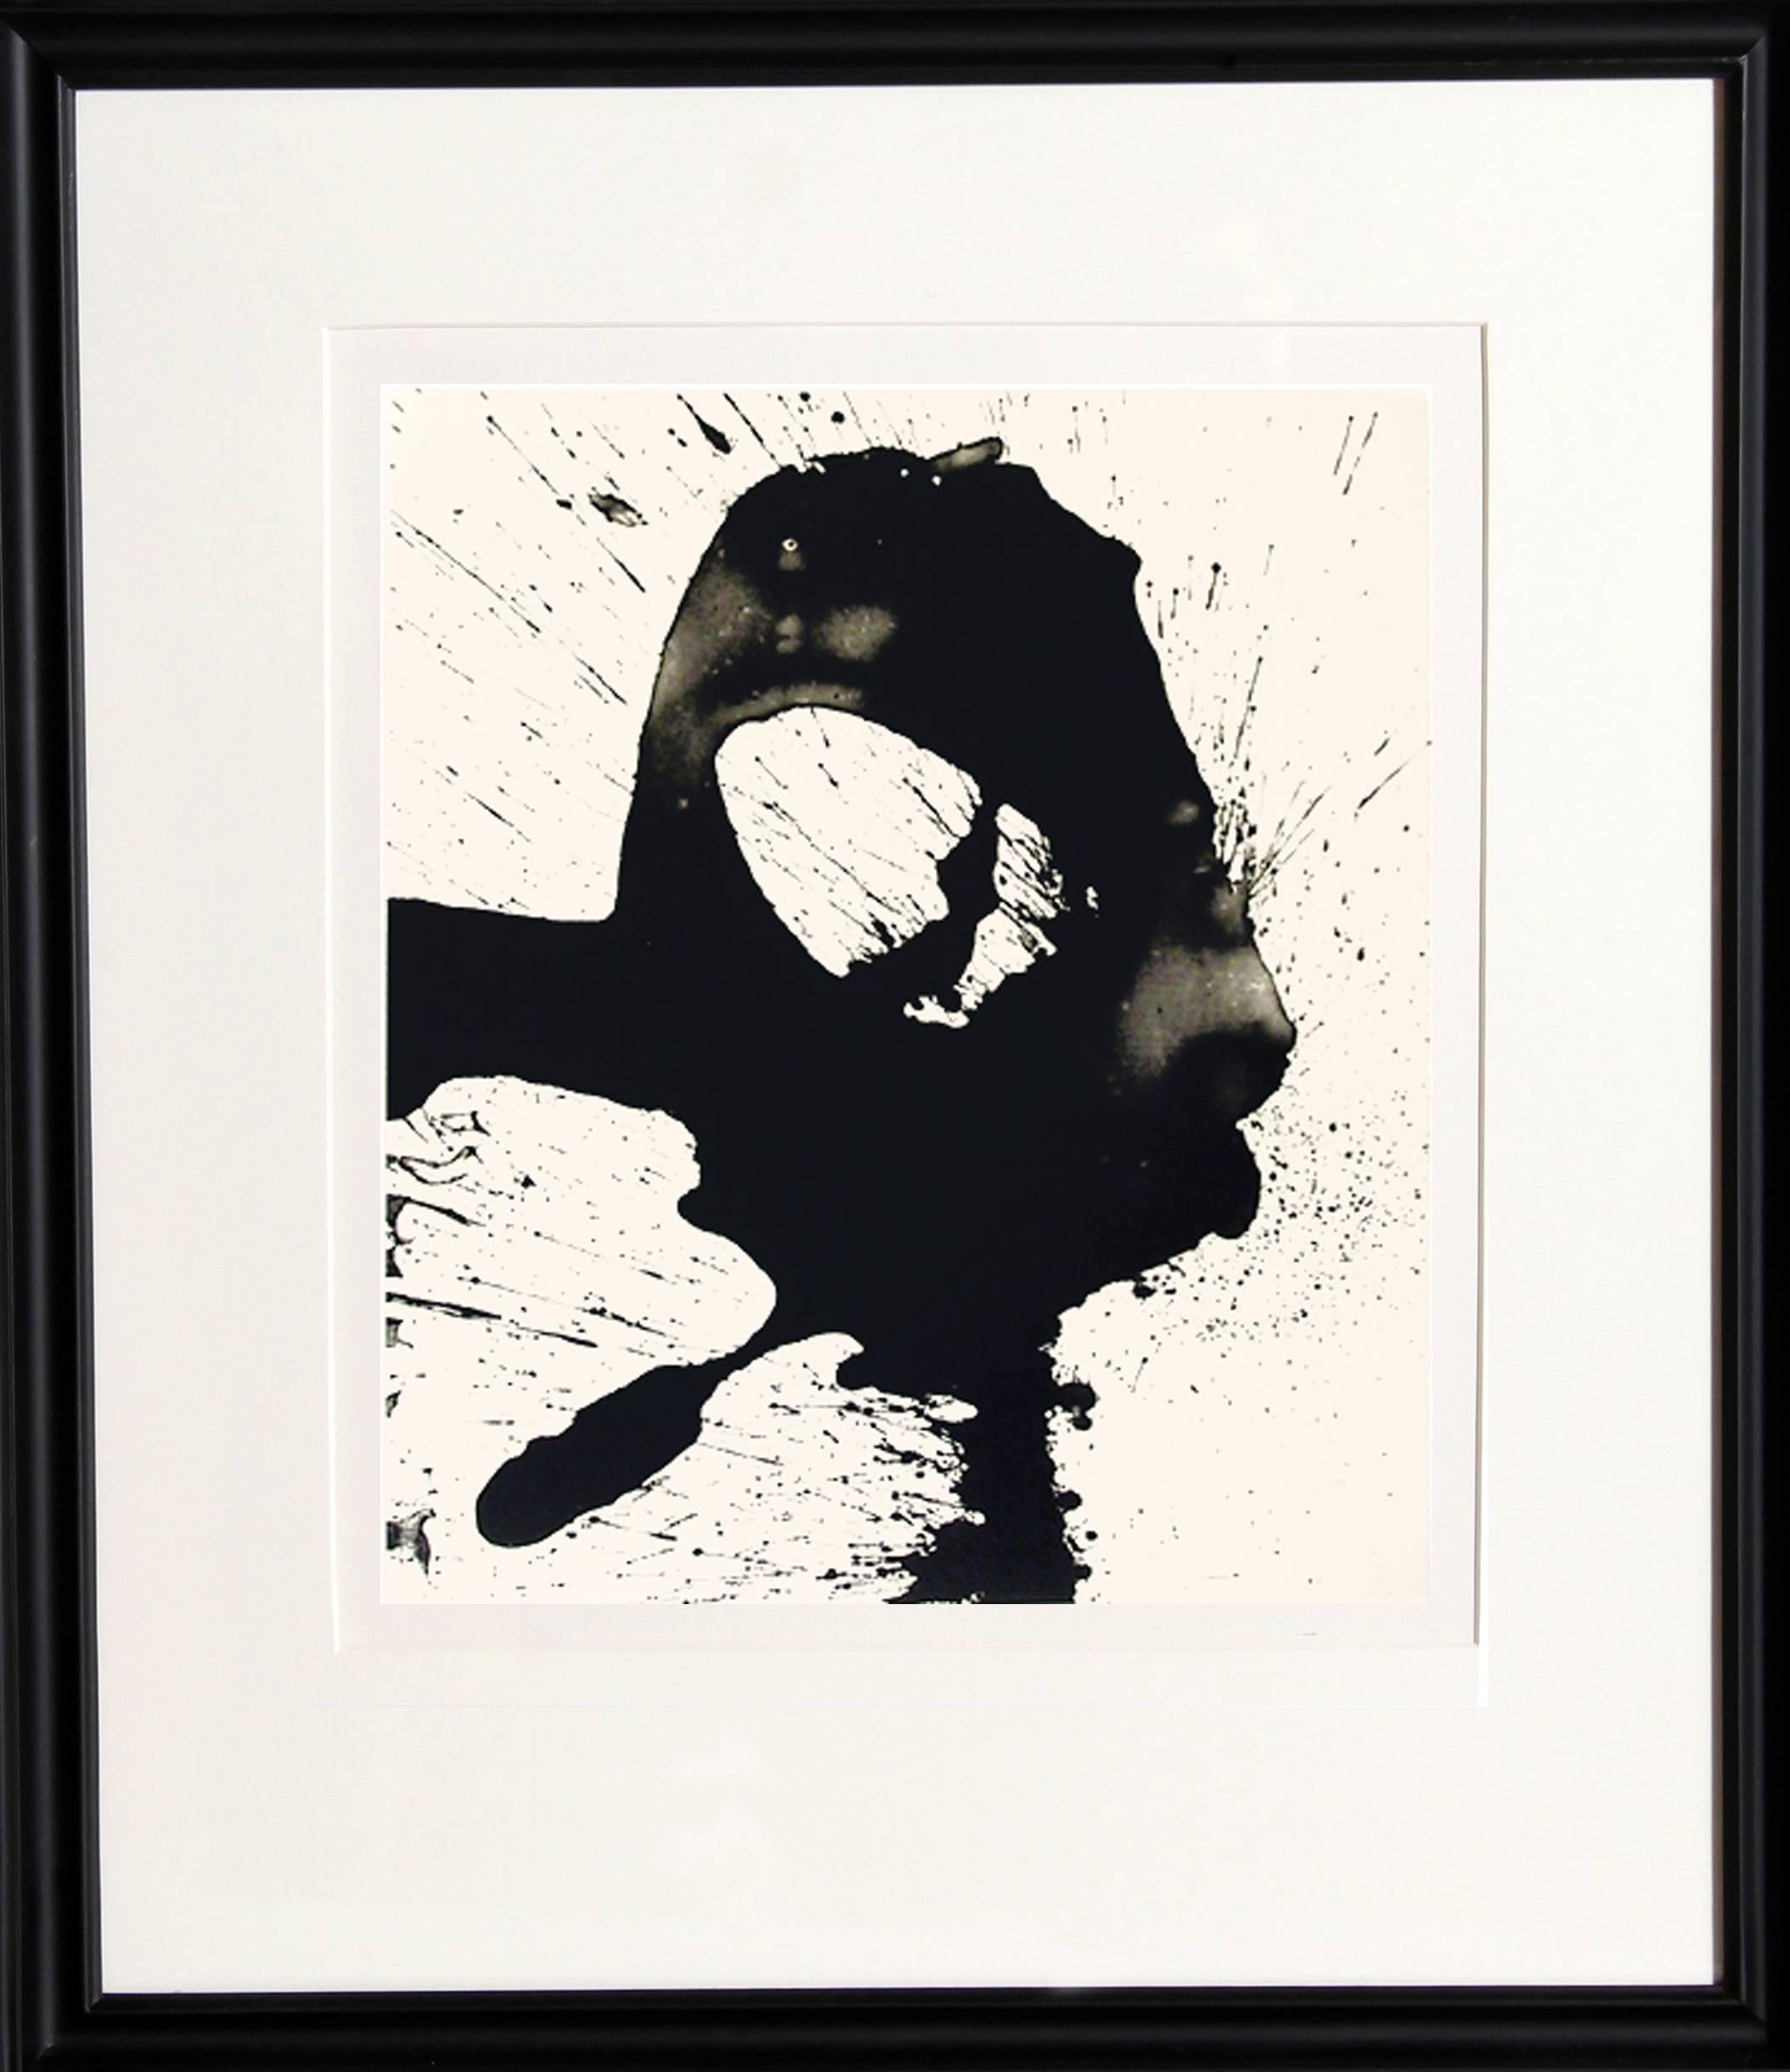 Robert Motherwell Abstract Print - Three Poems: Nocturne I, collaboration with Octavio Paz